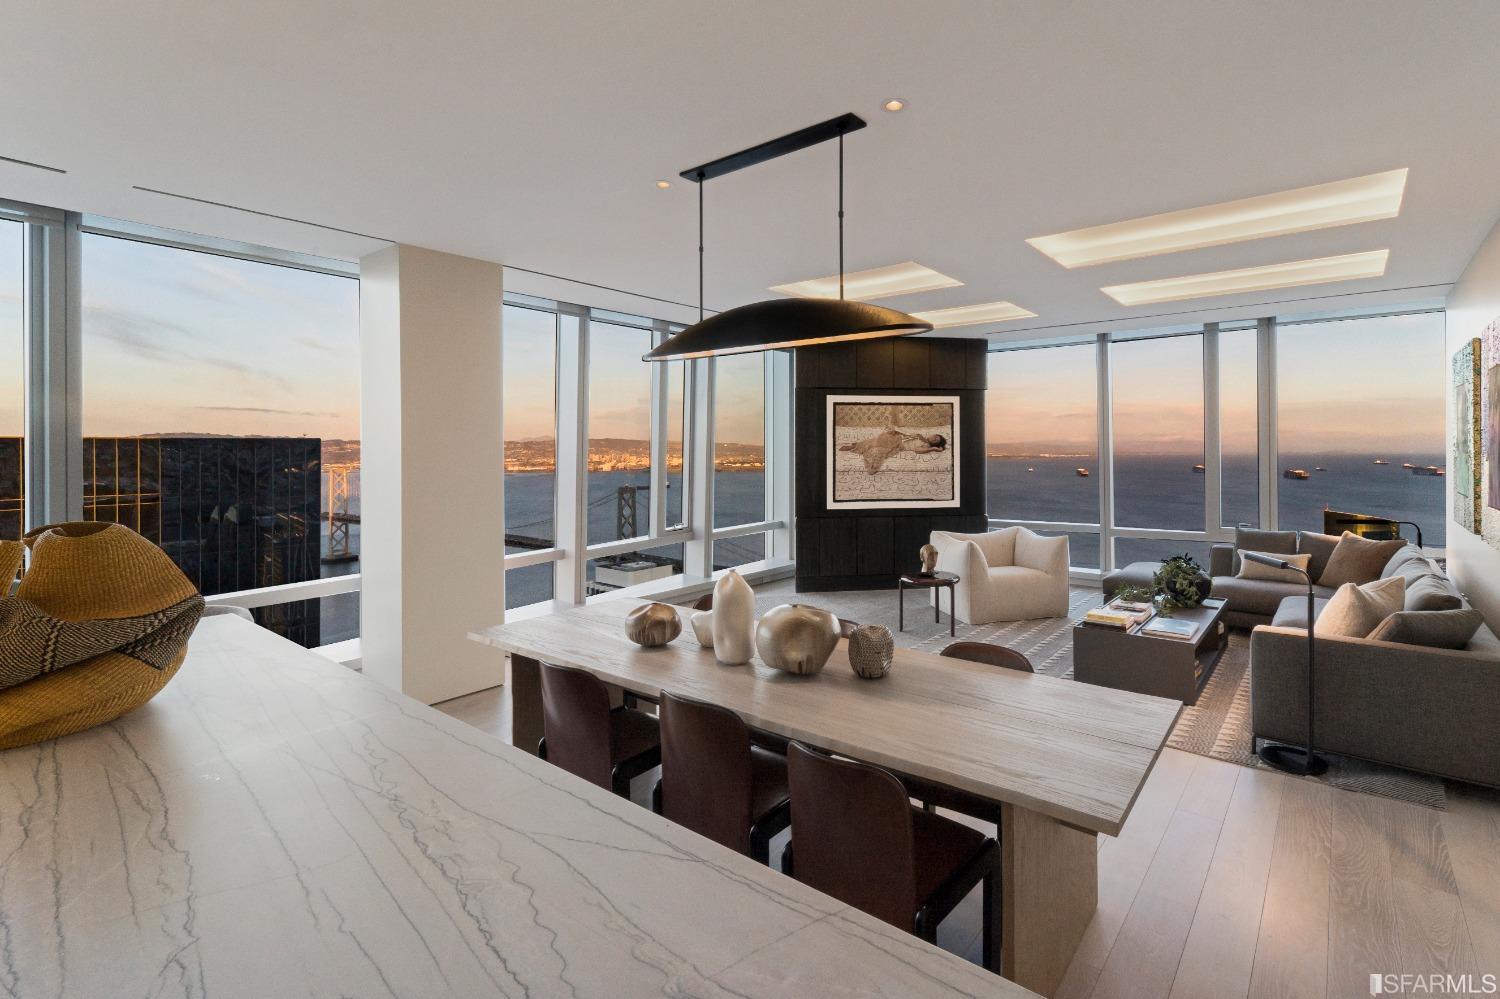 Introducing Residence 62B, the final 3-bedroom, 3-Bath B floor plan at 181 Fremont. This 2,263 square foot home is located over 580 feet in the sky featuring sweeping views of the city, Bay Bridge, and Salesforce Park. Priced at $6,880,000, this home includes two (2) parking spaces and is meticulously appointed with the finest features and finishes hand-selected from around the globe including French oak hardwood floors, an open kitchen with Miele and Sub-Zero appliances and a spa-like primary bath wrapped in Arabescato Corchia marble.    Beyond exceptional privacy and unrivaled views, 181 Fremont boasts 5-star services, a world-class art program, private full-floor Residents' Club with a 360-degree open-air terrace, fireside gathering area, multiple lounges, state-of the art fitness center with yoga studio and more. Plus 181 Fremont is the ONLY residential building with direct access to Salesforce Park, providing a 5.4-acre park literally at your doorstep.